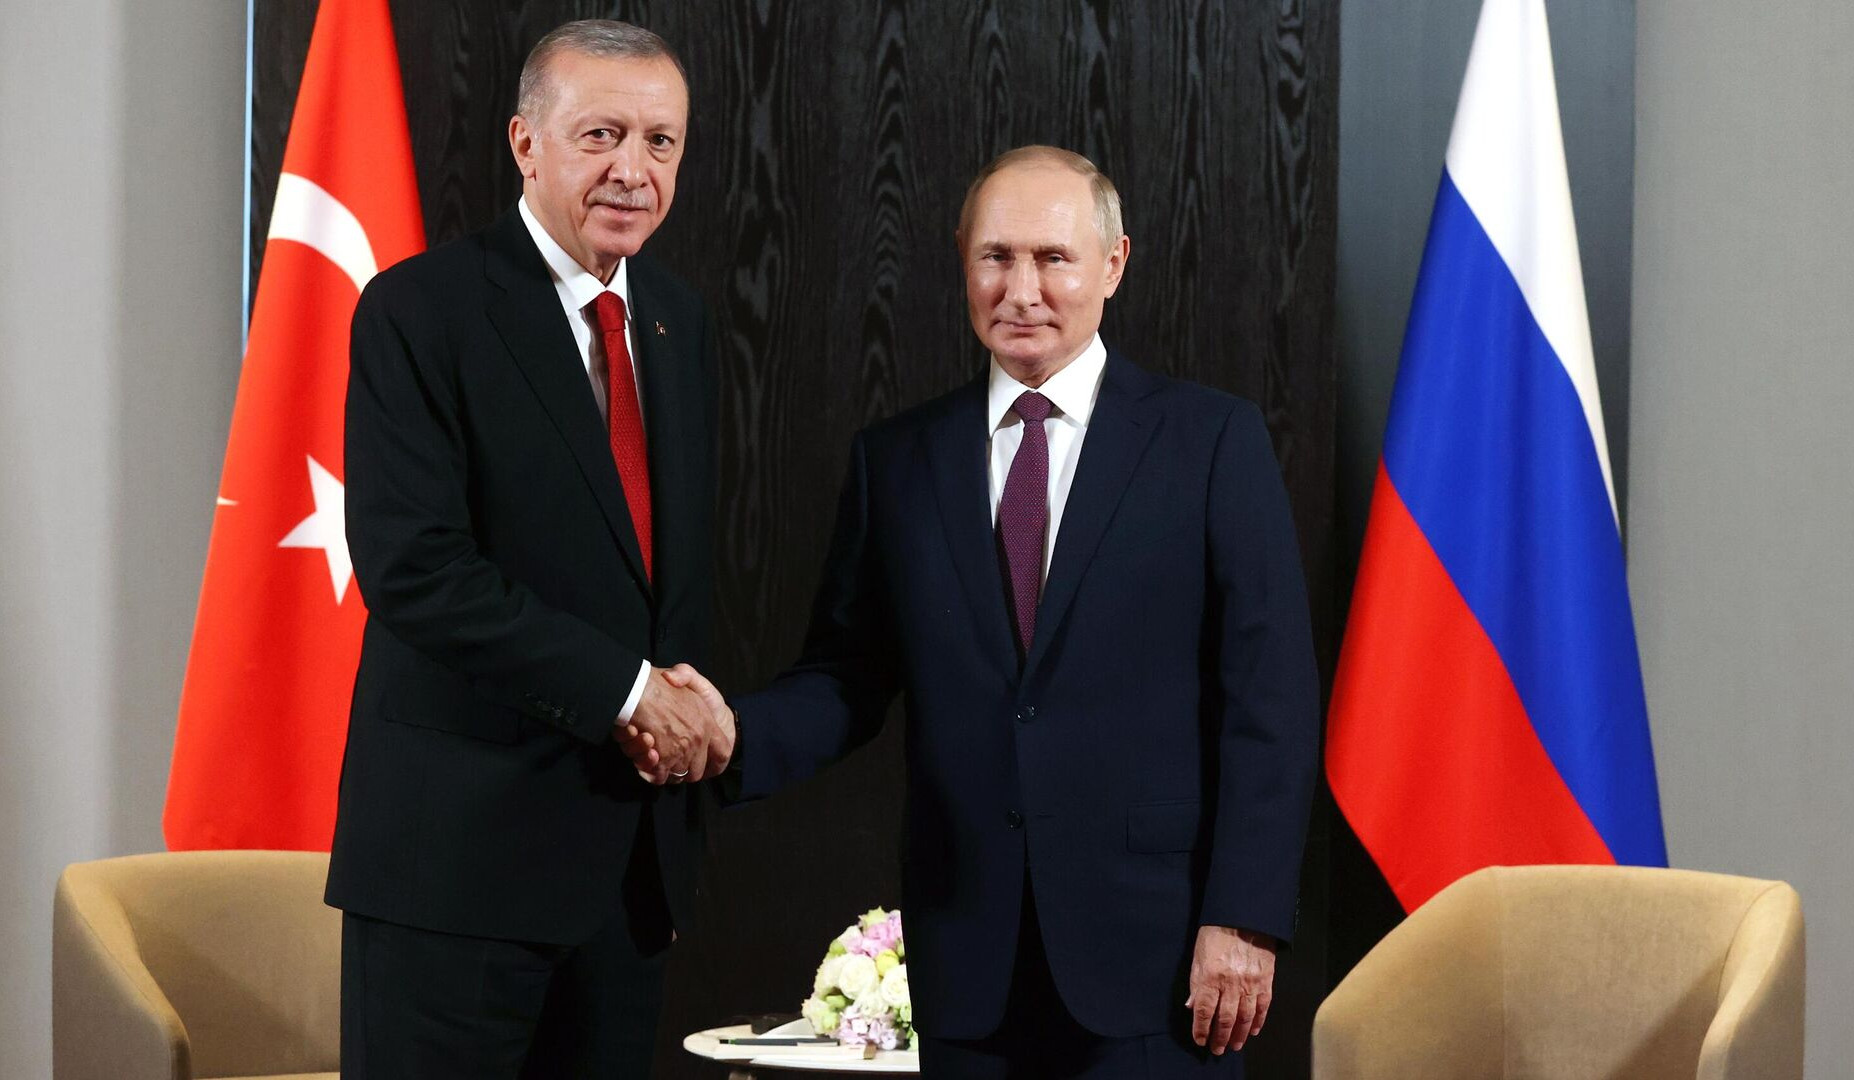 Moscow to announce dates for Putin’s visit to Turkey in due time, Peskov